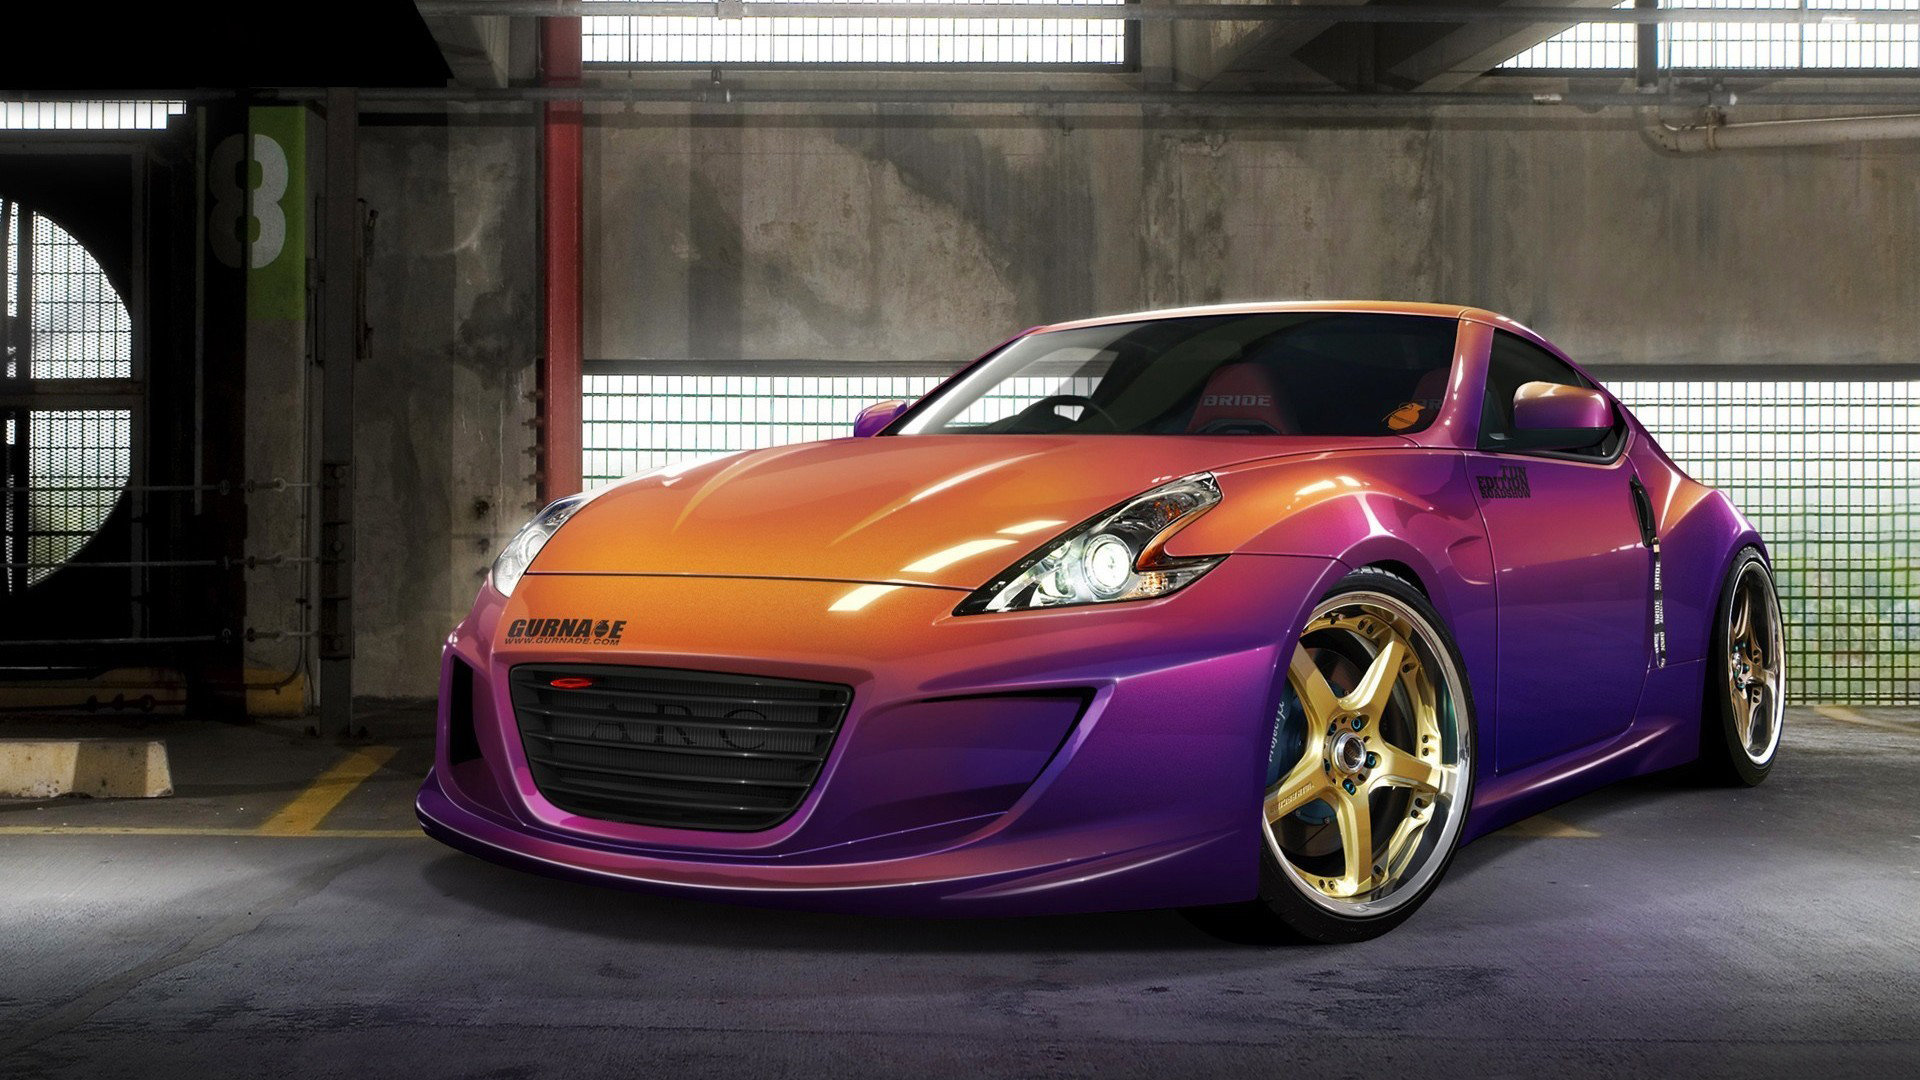 High Resolution Nissan 370z 1080p Wallpaper Id 53443 For Computer Images, Photos, Reviews